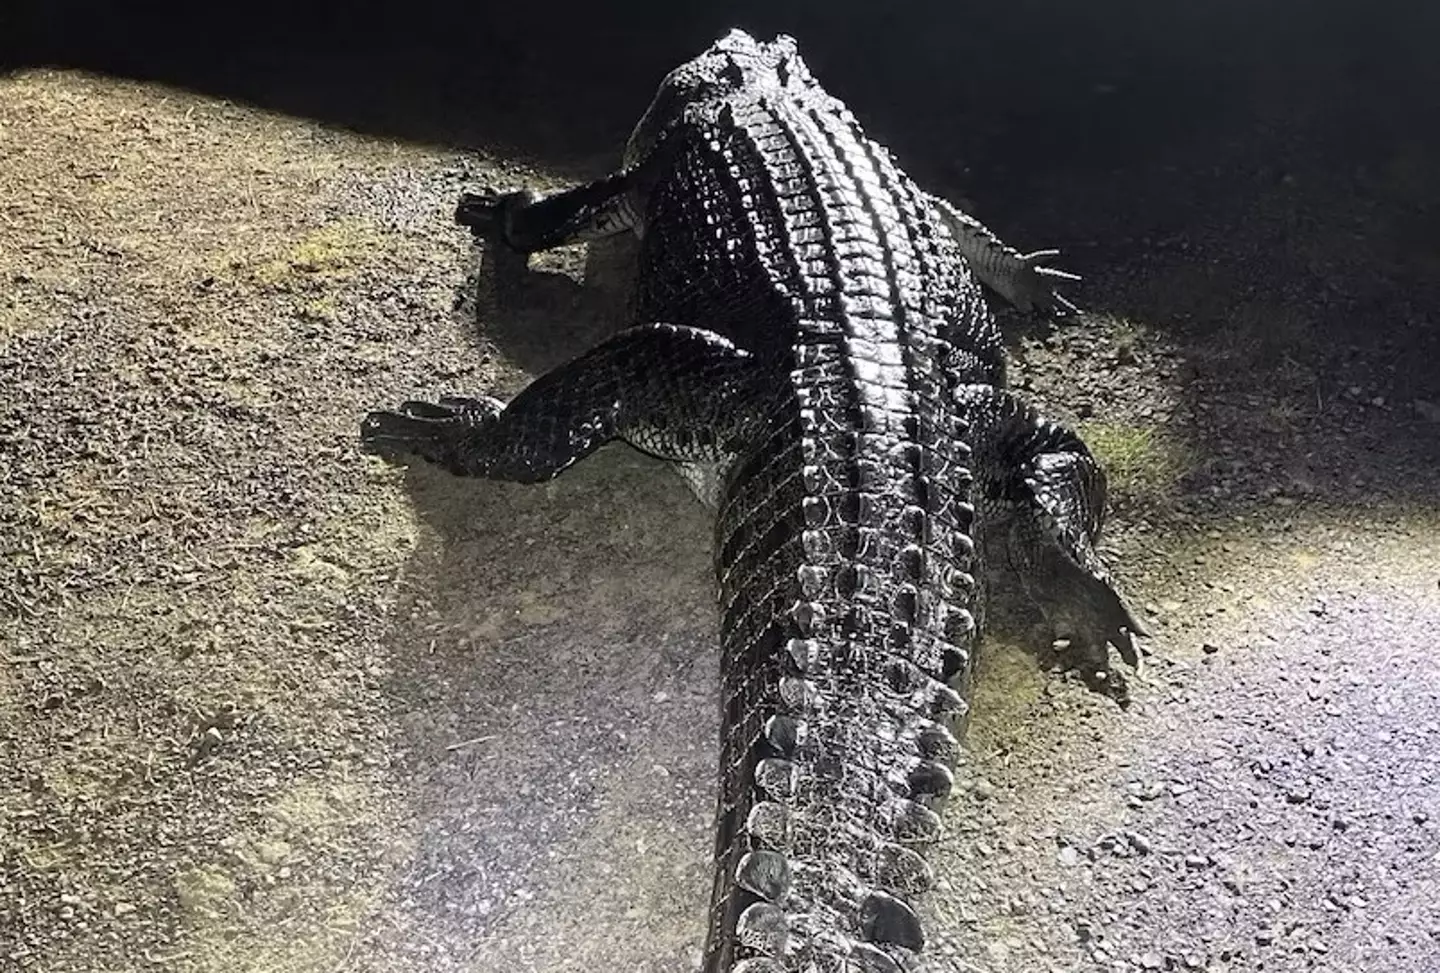 Wildlife officials had to shoot this crocodile dead after it attacked a man and ate his dog.